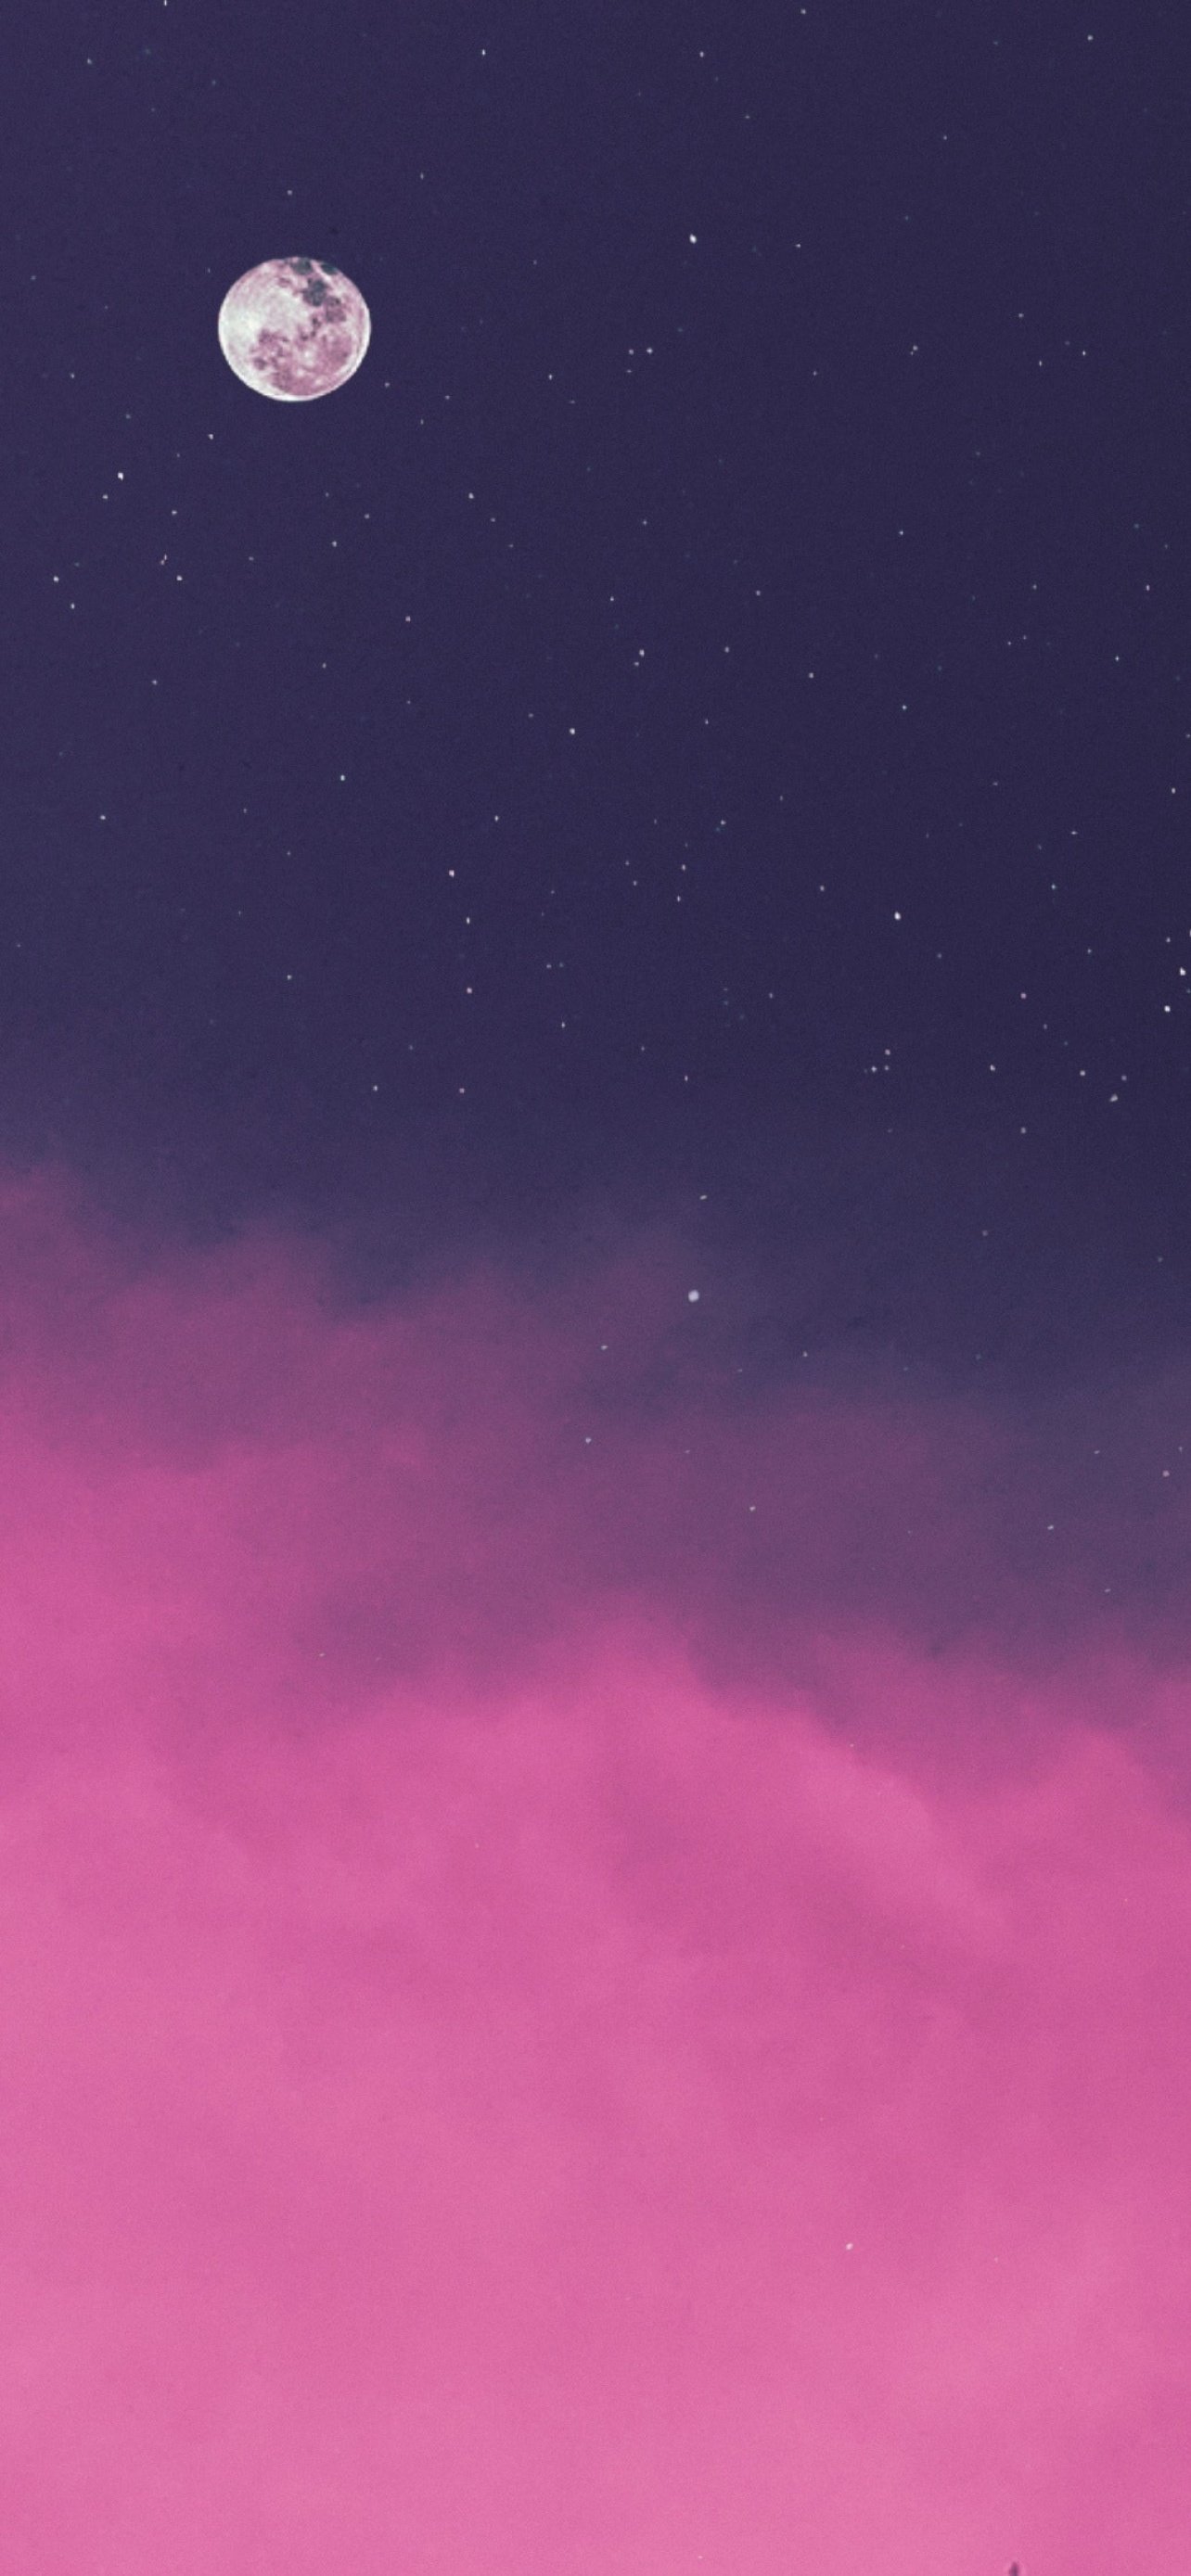 Pink clouds Wallpaper 4K, Moon, Sky view, Nature